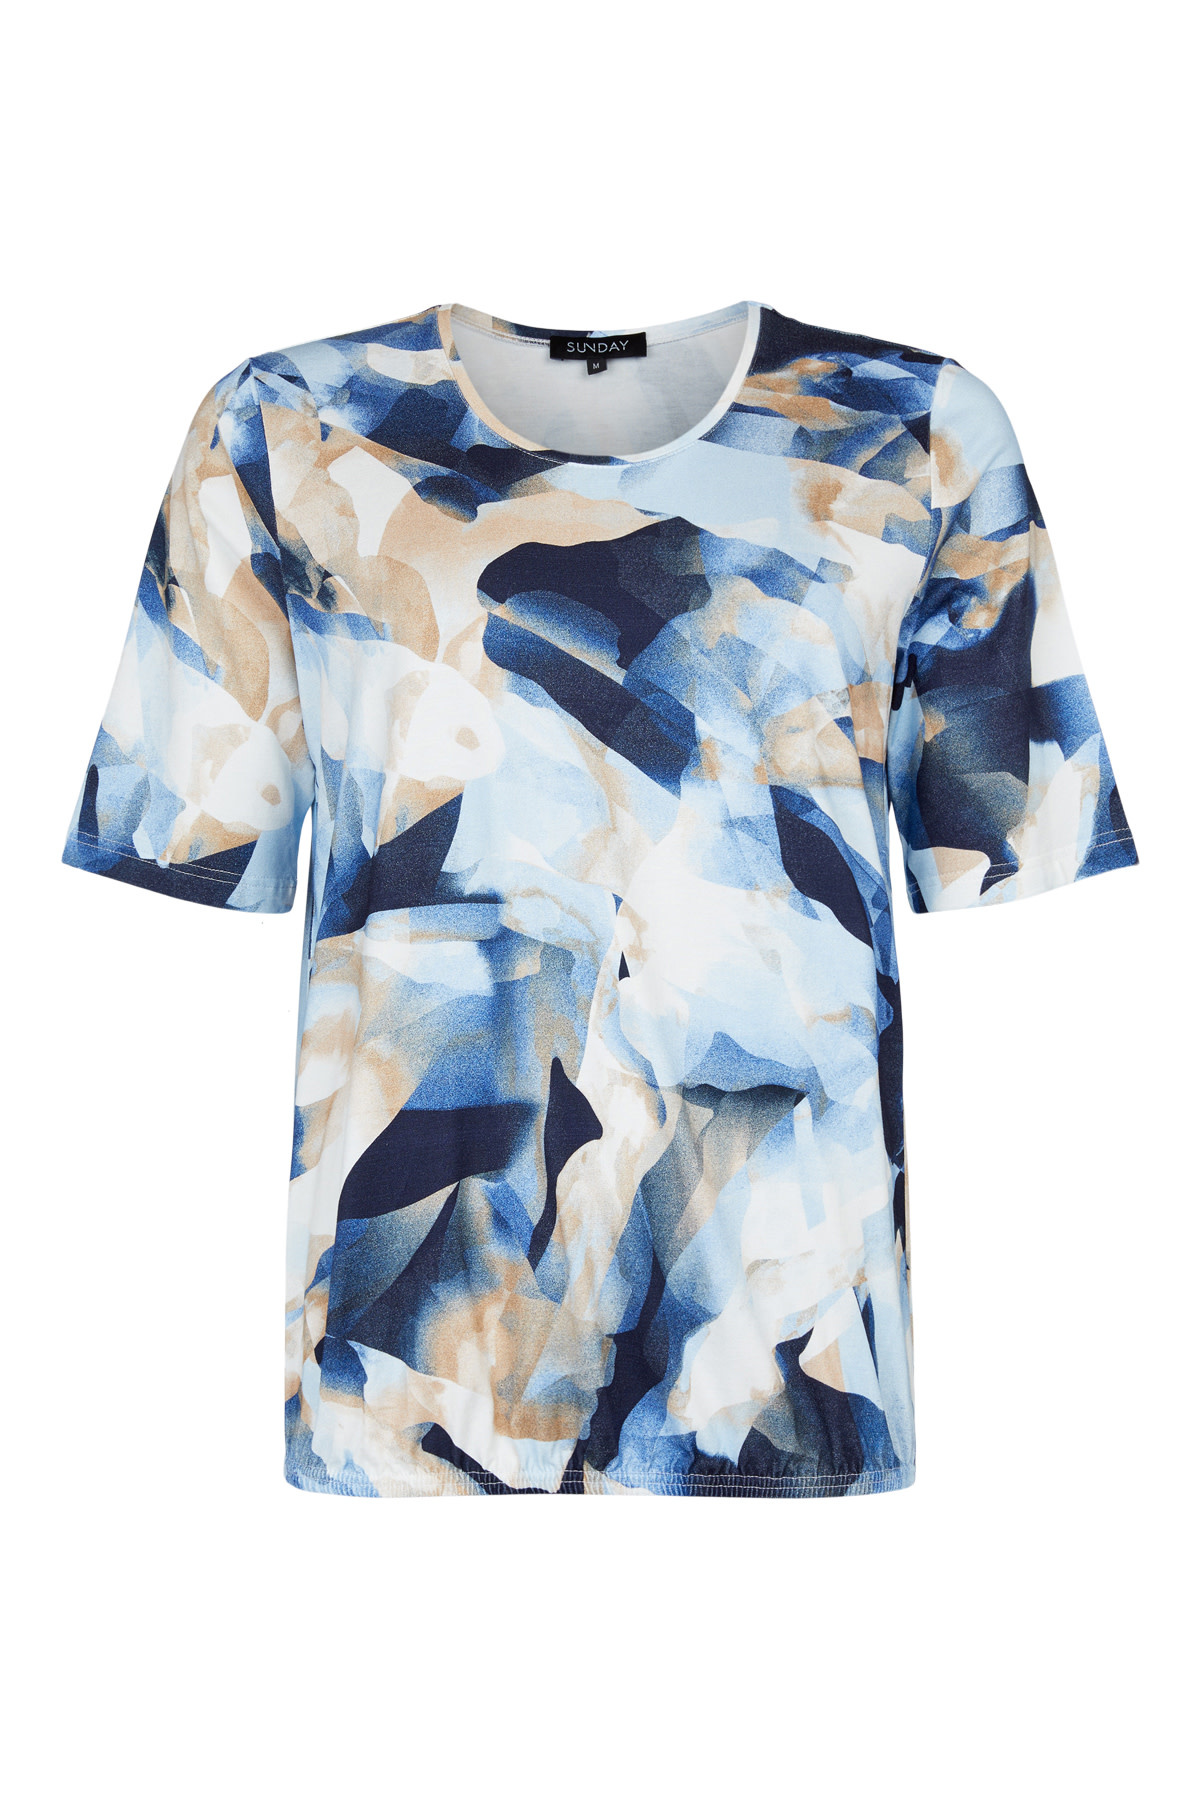 Abstract Blues Print Top with Elastic Hem